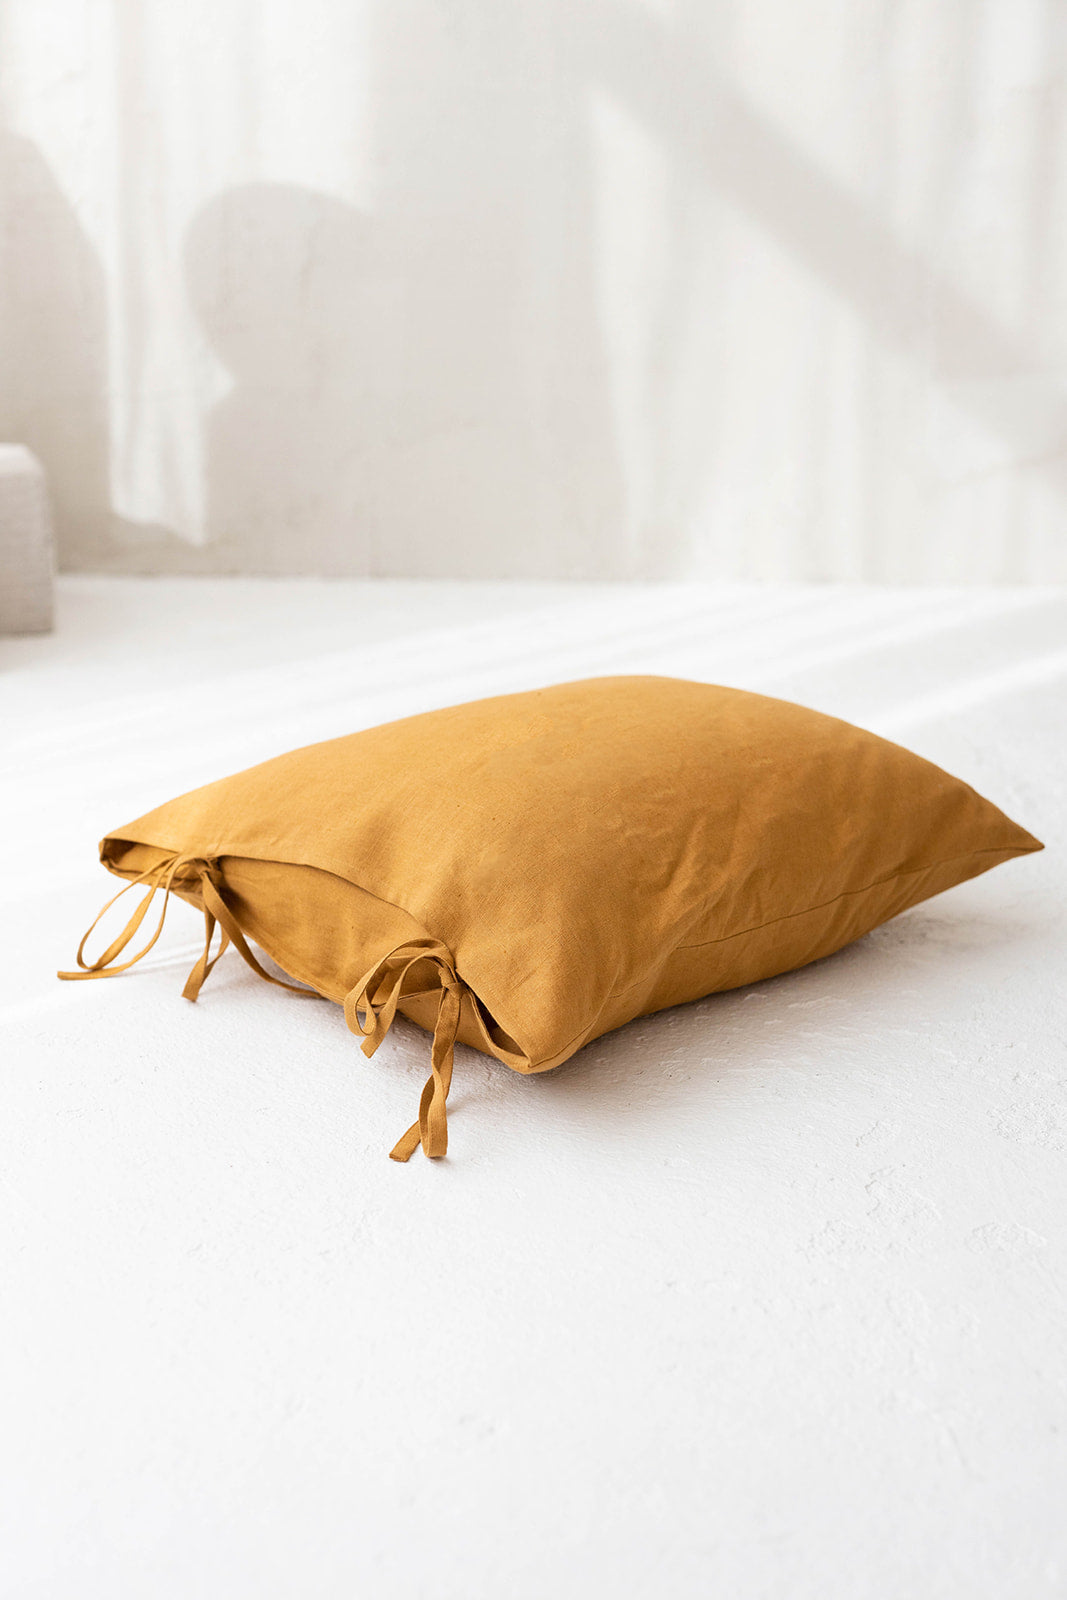 Linen Pillowcase With Ties In Amber Yellow Color 1 - Daily Linen